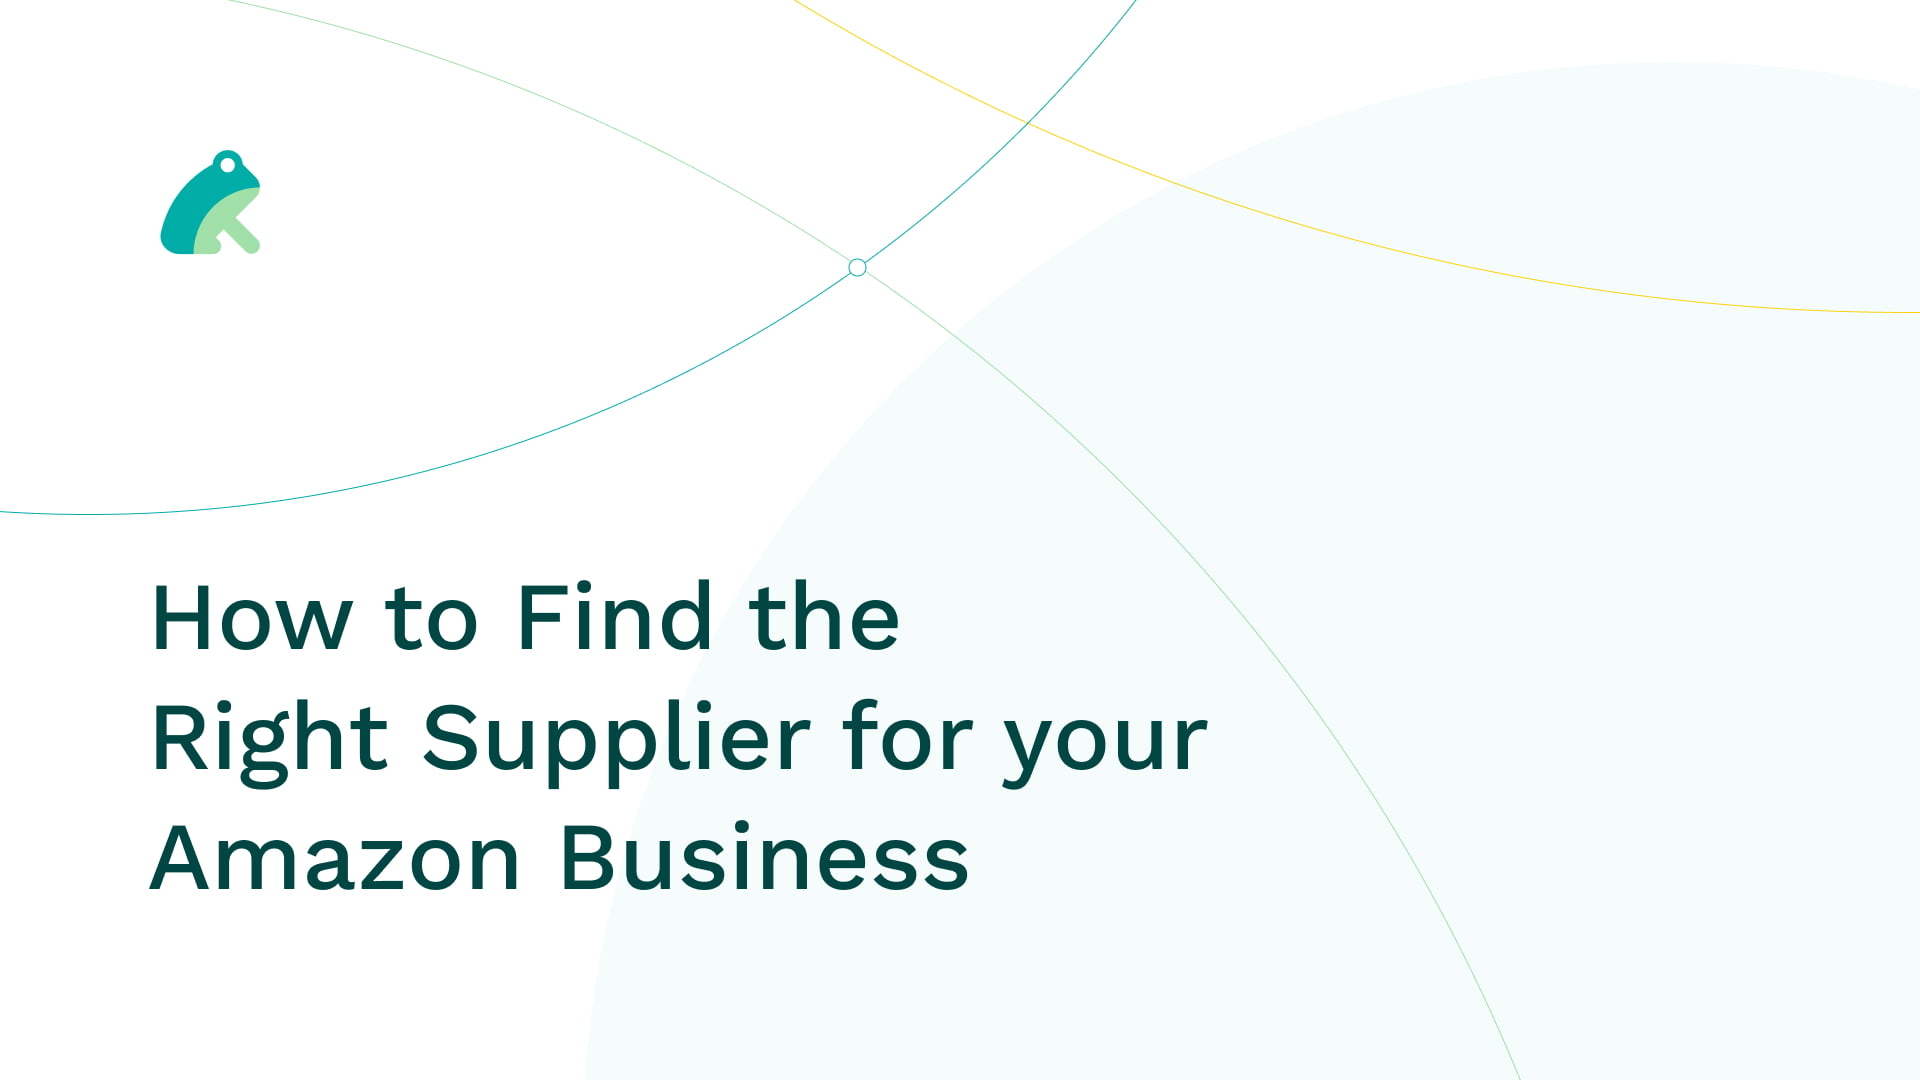 How to Find the Right Supplier for your Amazon Business